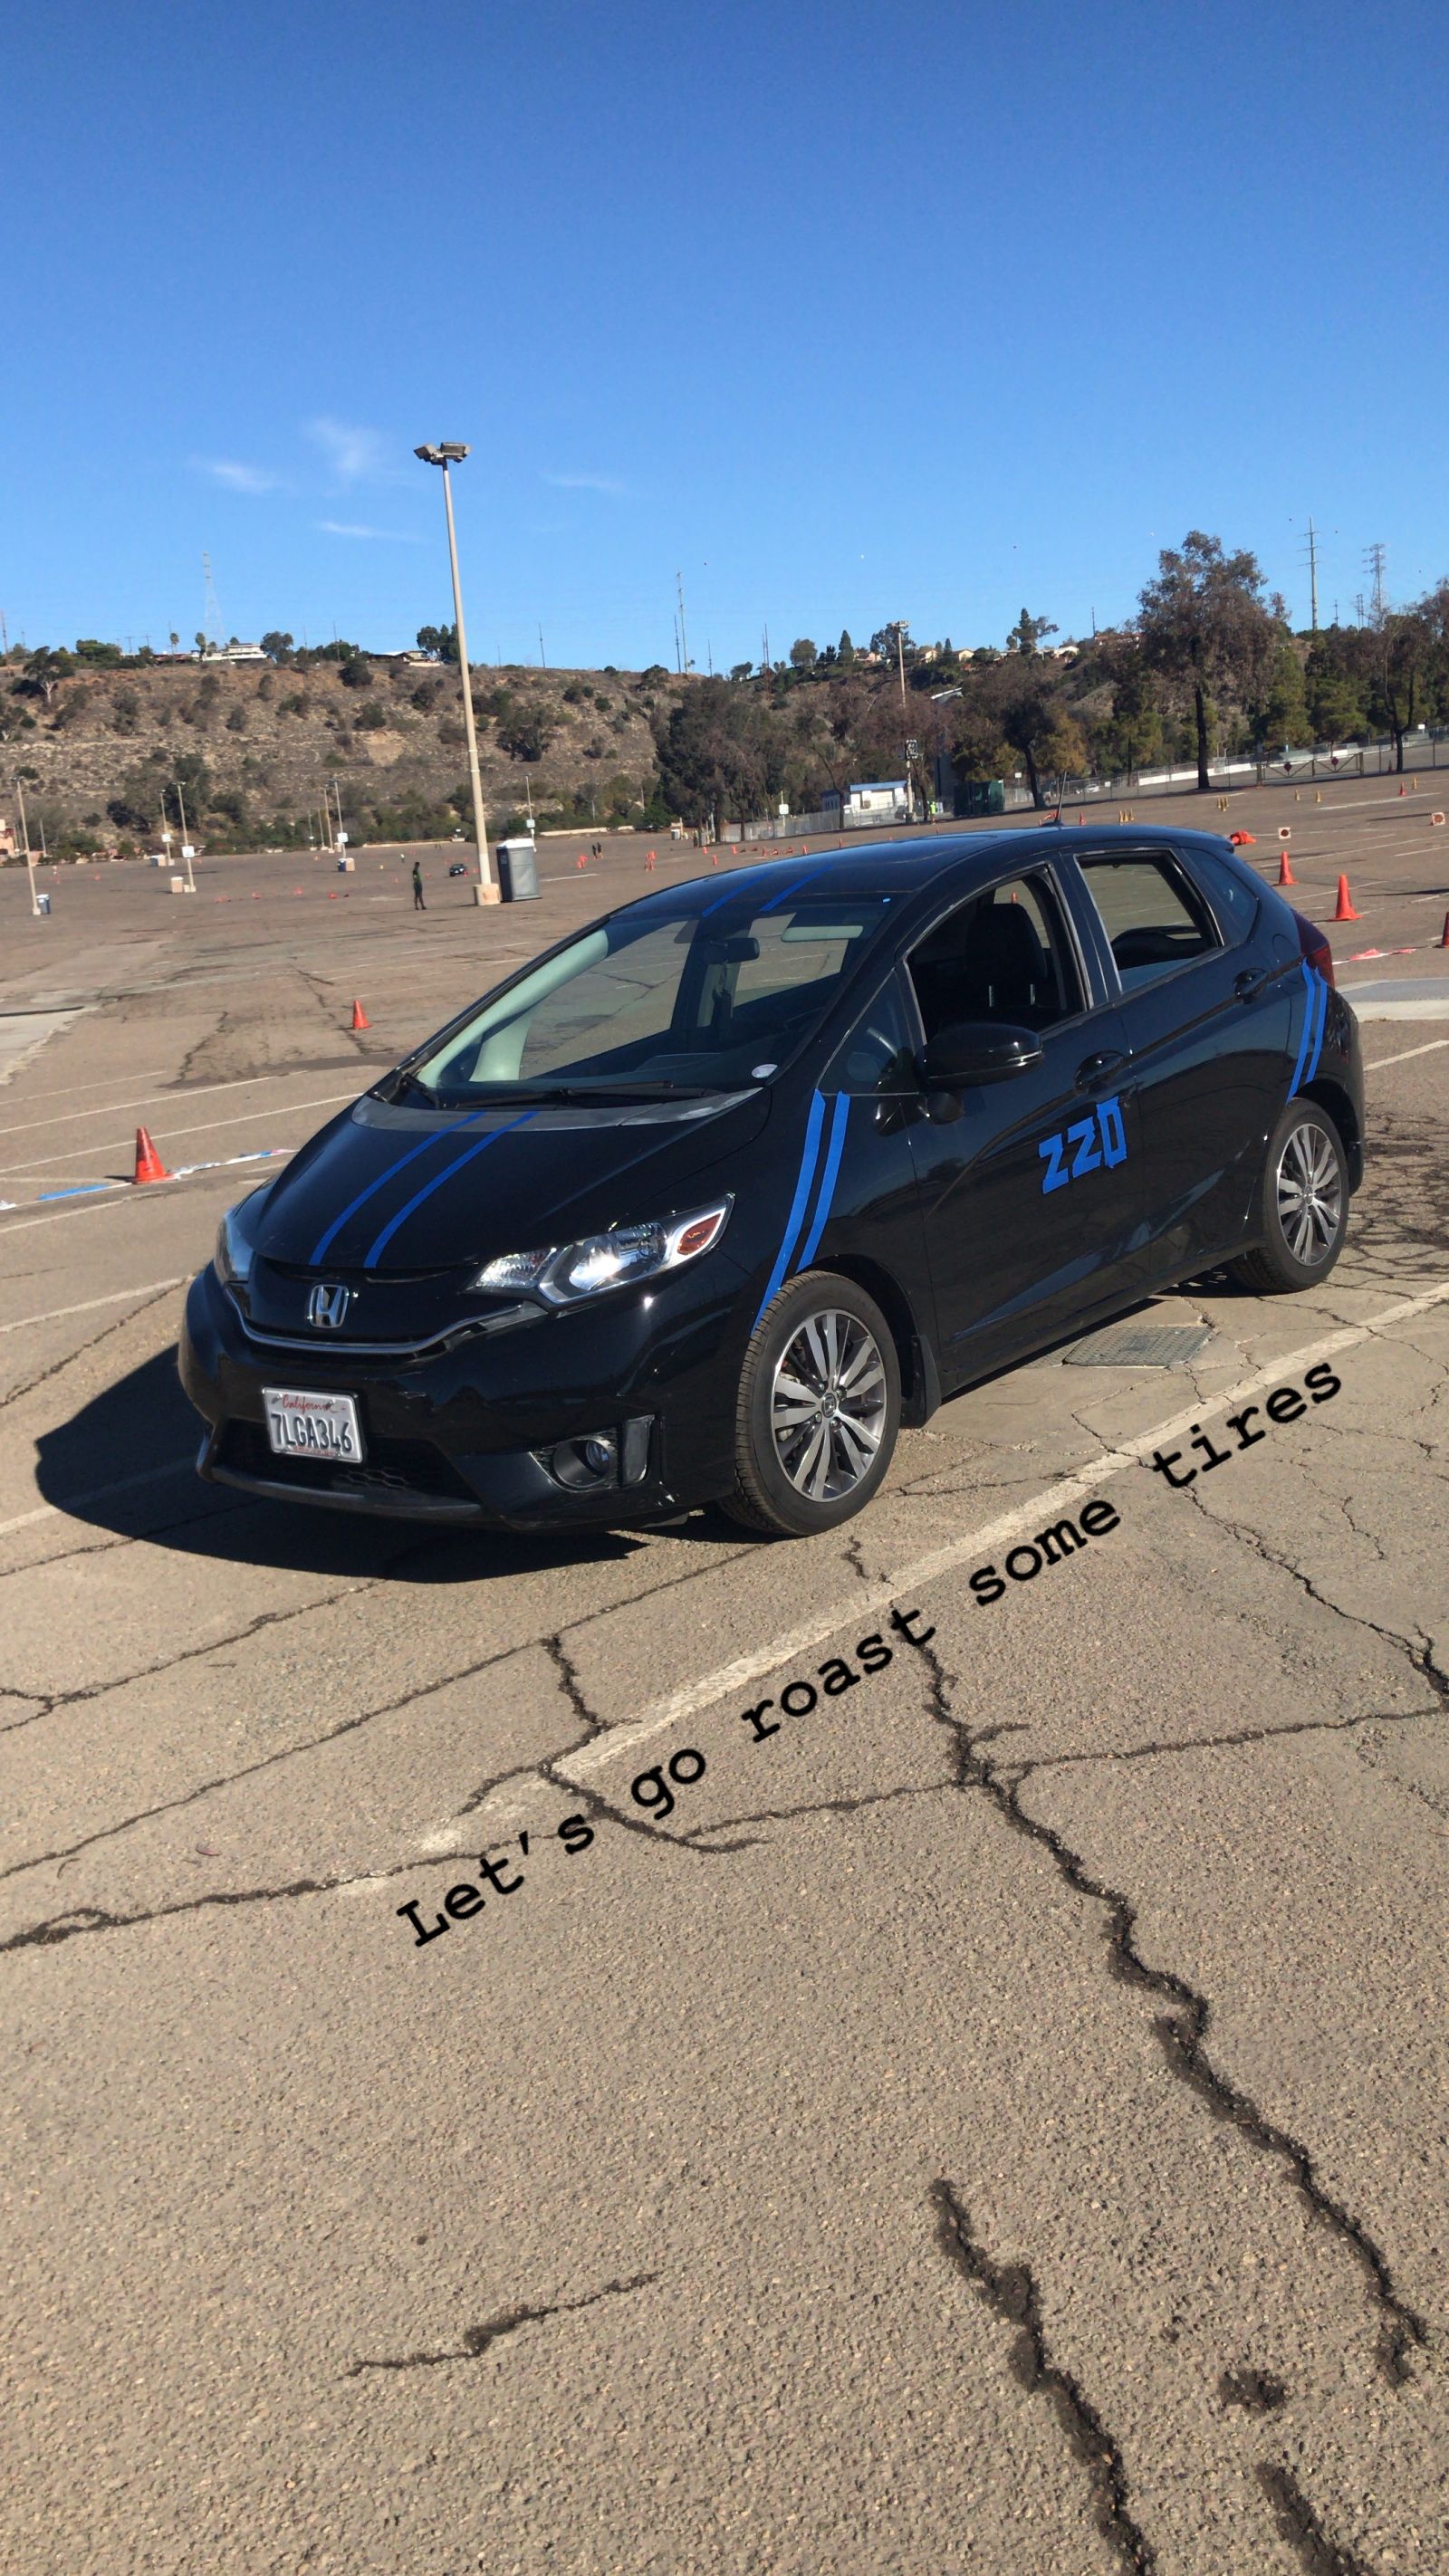 Illustration for article titled Honda Fit: Quick Review After a Class Win at Autocross